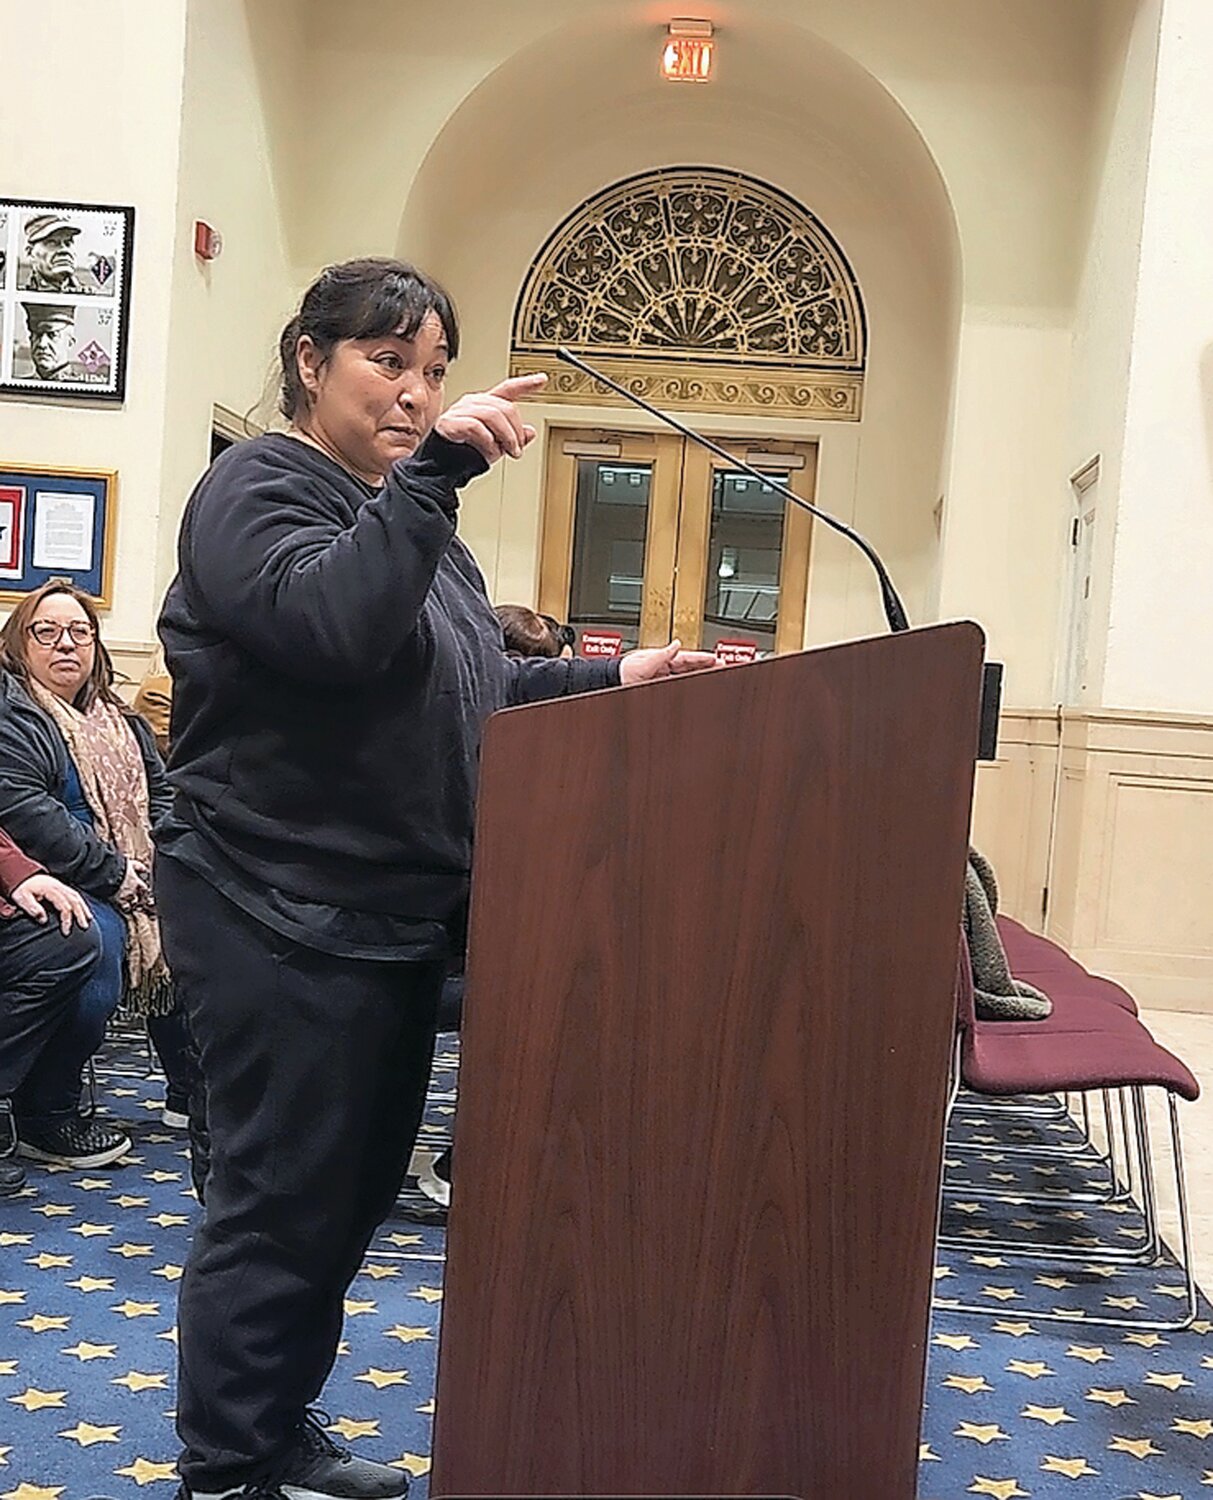 Rachel Bueno, a staff member at The View Grill, said she was upset with the council’s overdue vote, and added that she thought the RFP process was a facade.